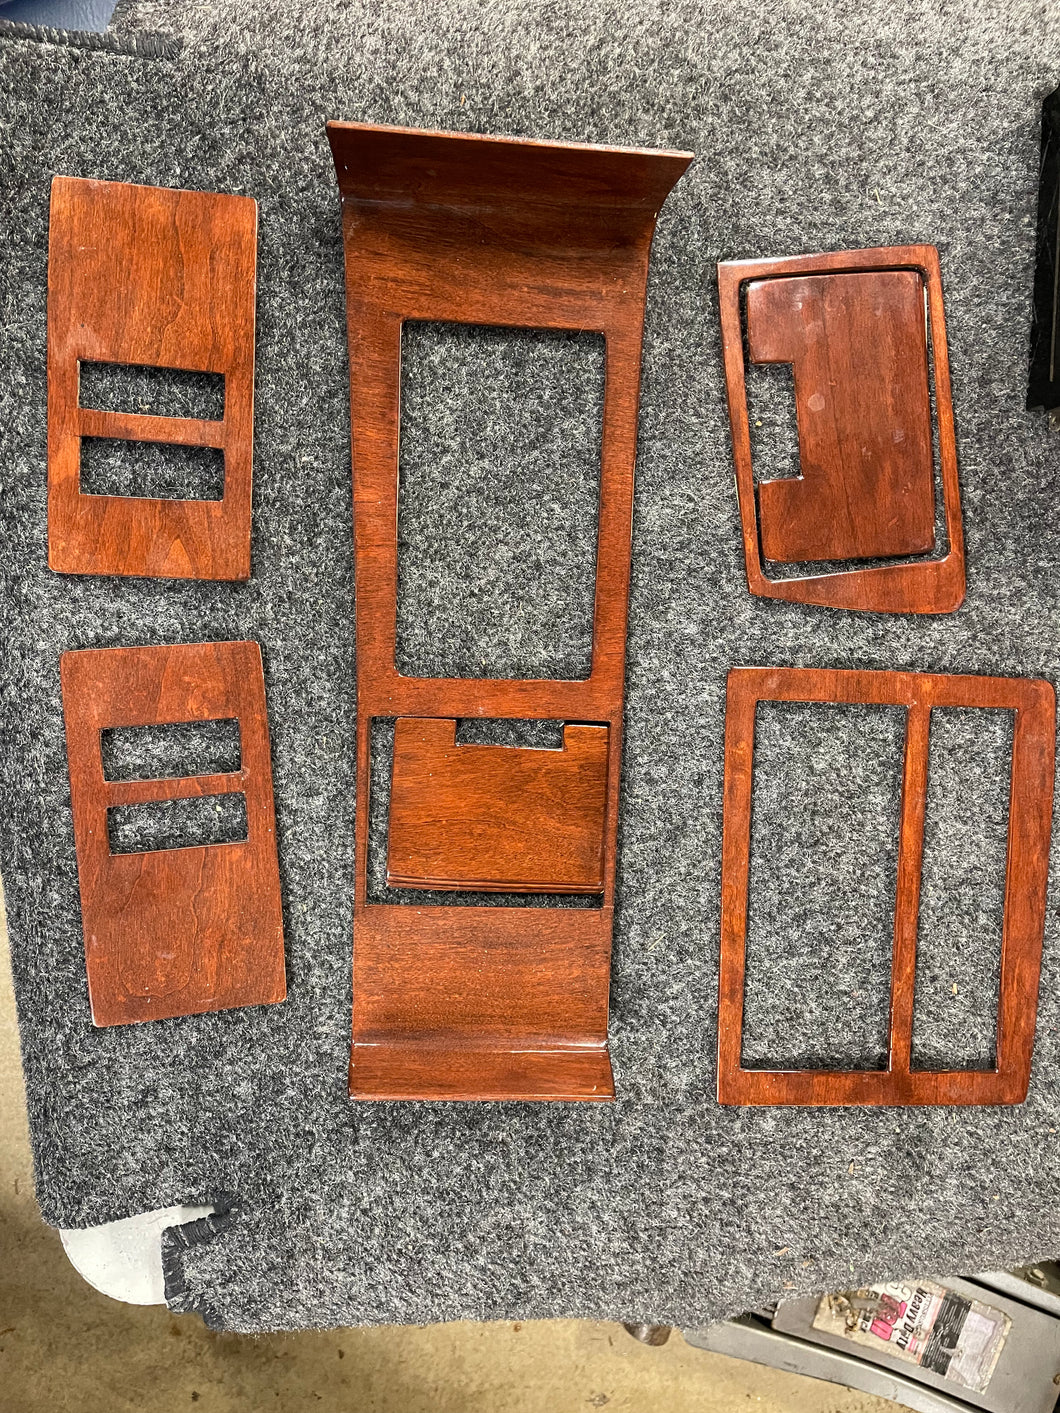 Real wood overlay dash kit for 1990 Reatta